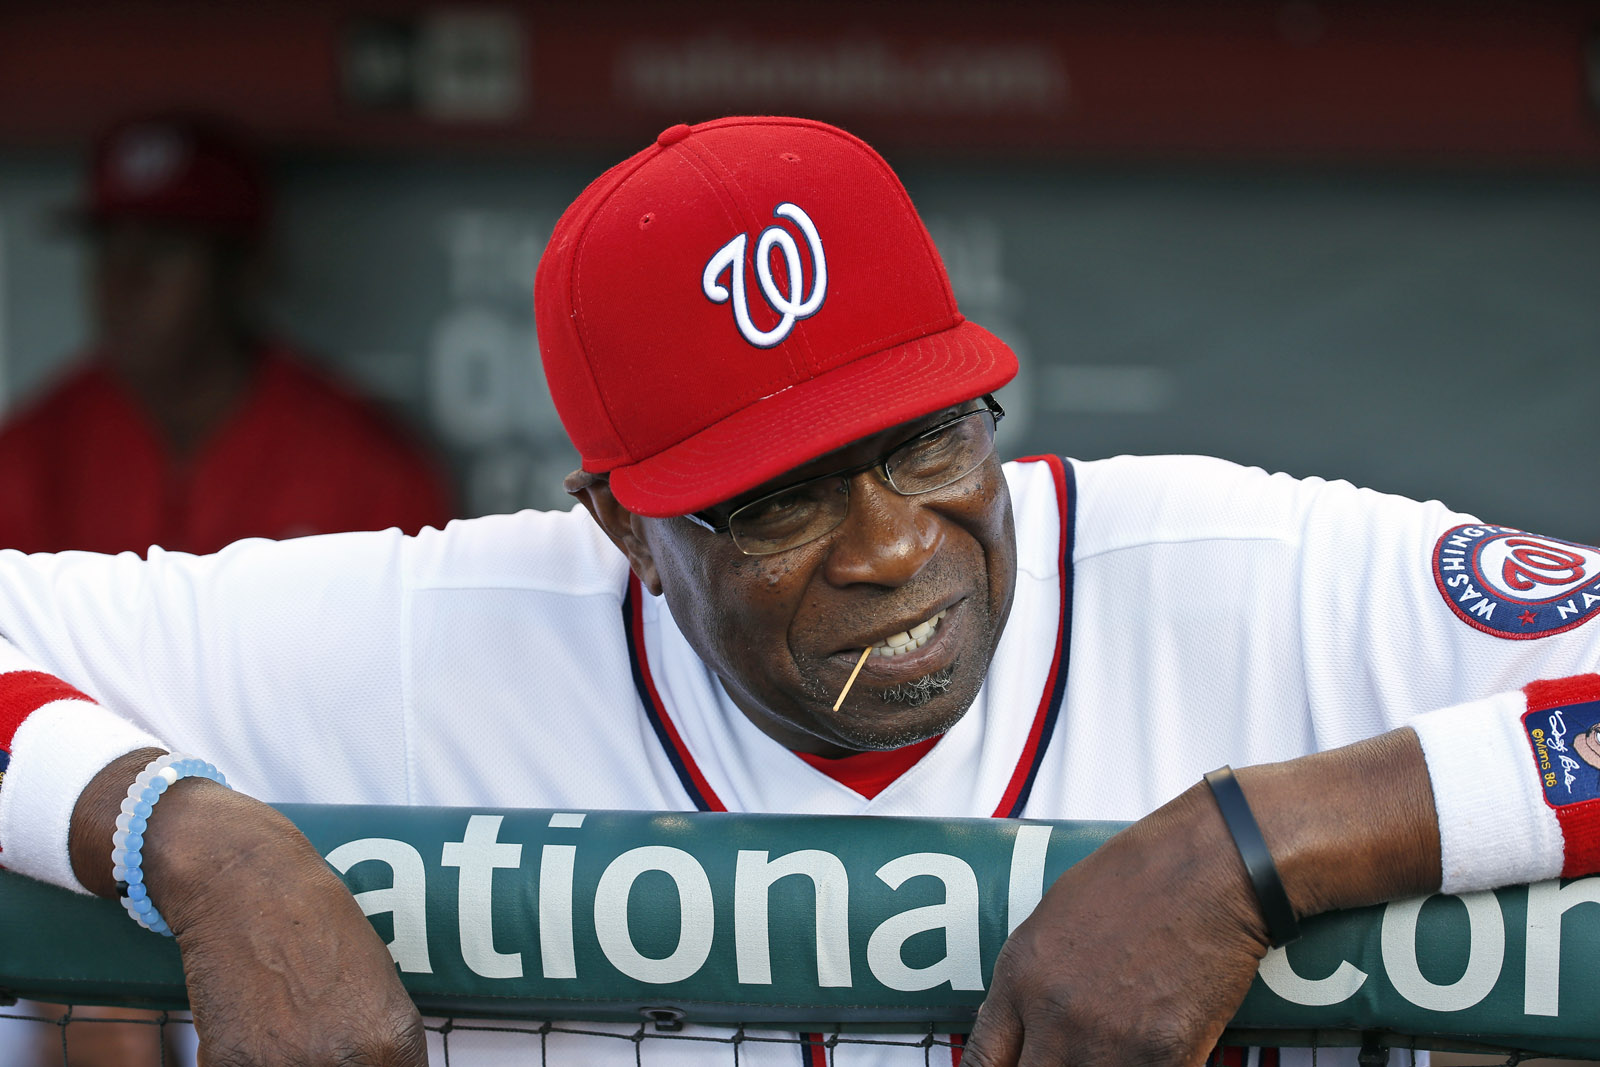 As DC considers chewing tobacco ban, Nats manager weighs in | WTOP1600 x 1067